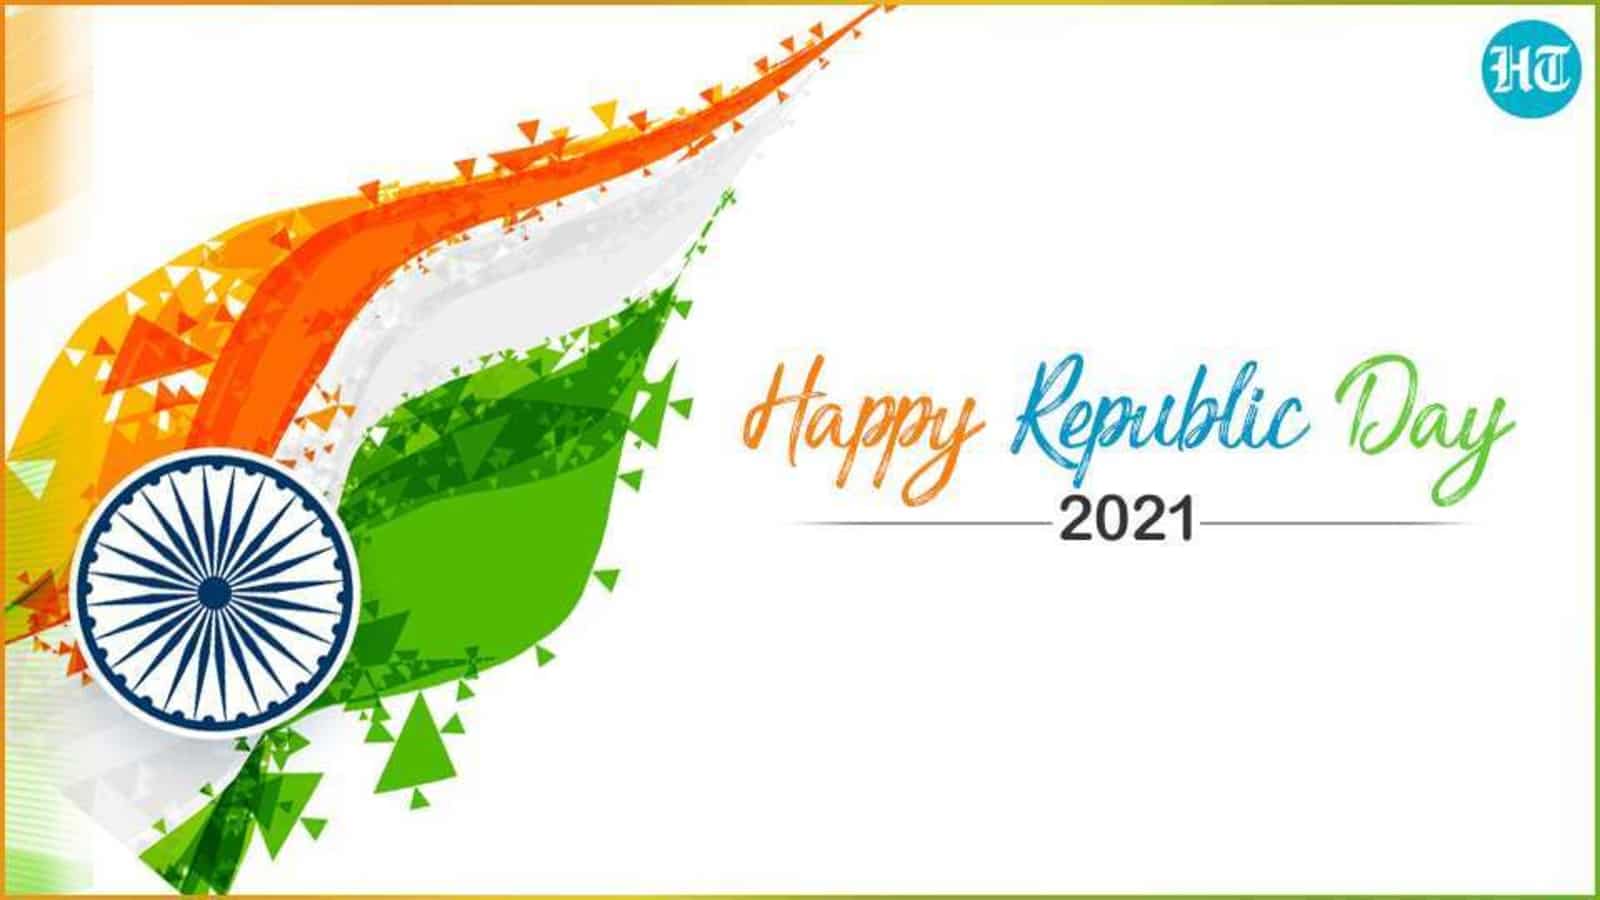 Republic Day 2021: Image, wishes and quotes to share with loved ones